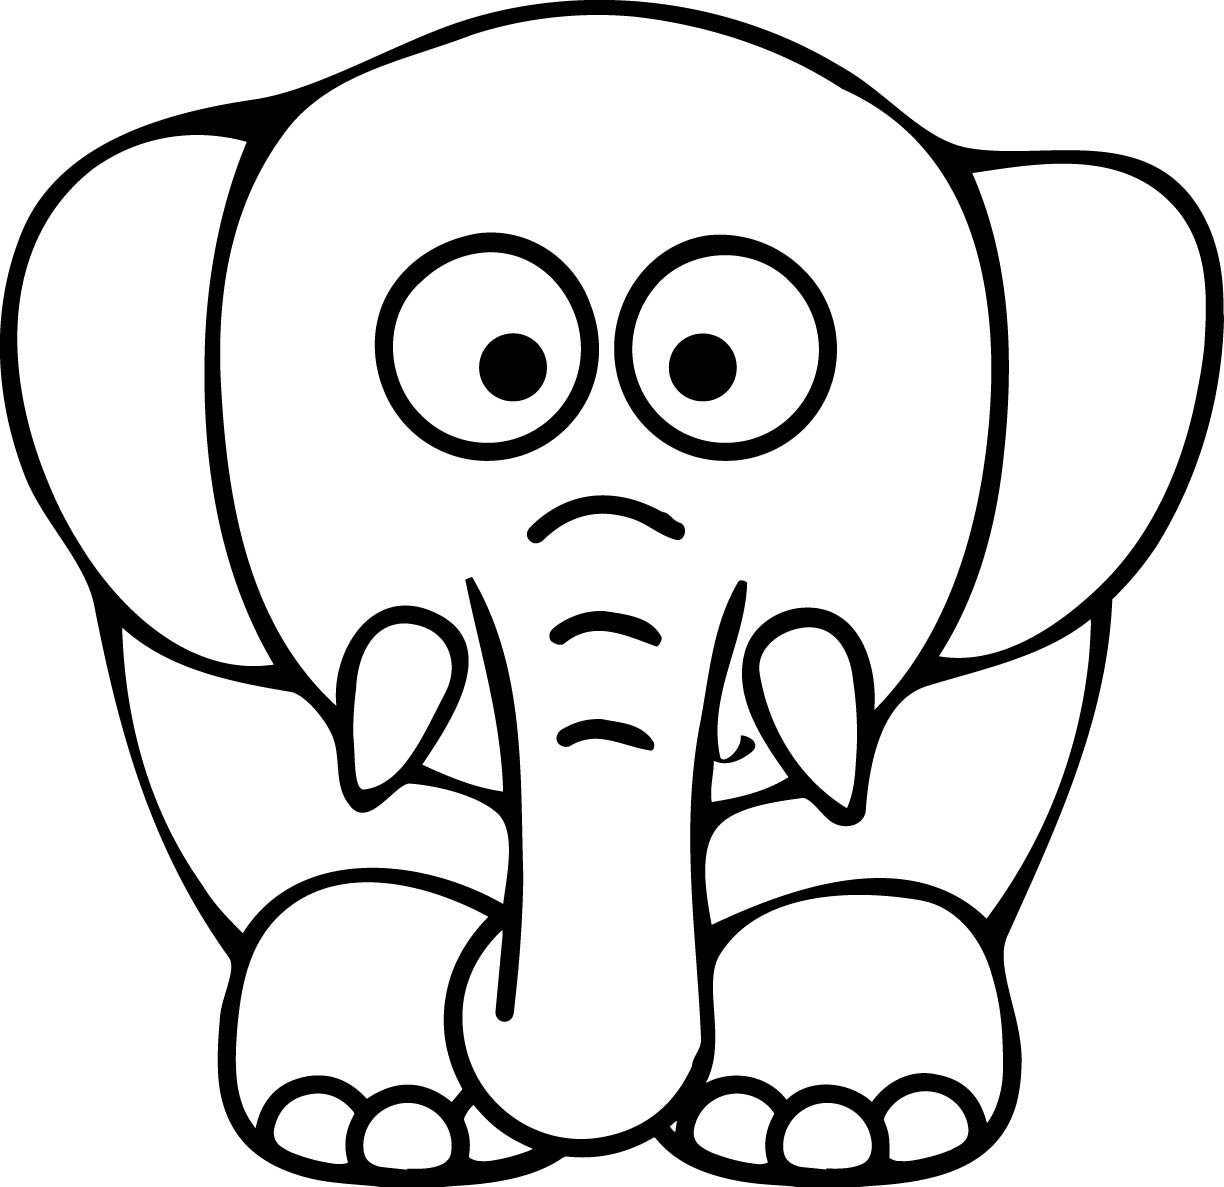 Elephant Face Coloring Pages at GetColorings.com | Free ...